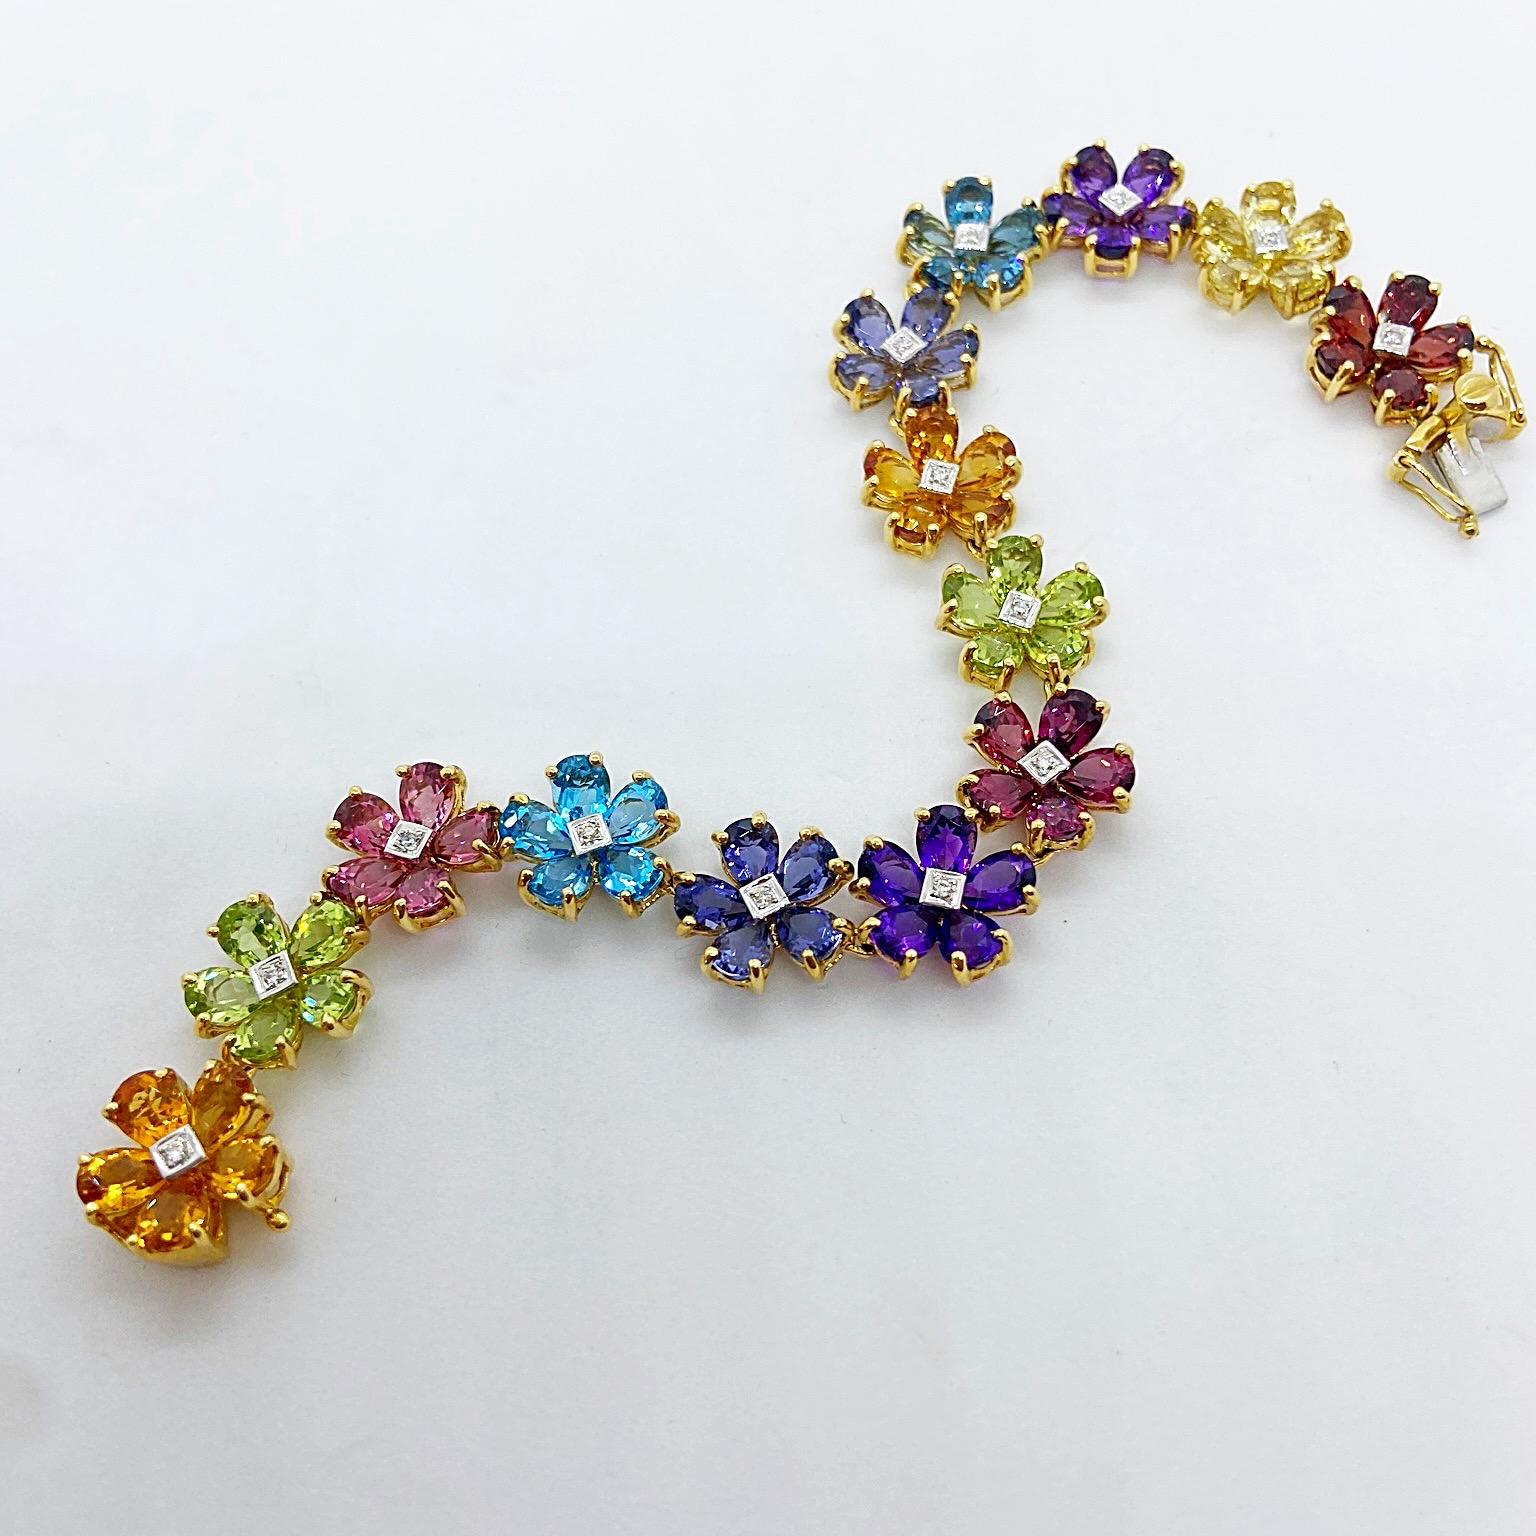 A Bouquet of Semi Precious Stone Flowers with Diamonds

This bracelet is designed with 14 flowers set in 18 karat yellow gold. Each flower has 5 pear shaped petals and a round brilliant Diamond center. The Semi Precious stones are Garnet, Lemon